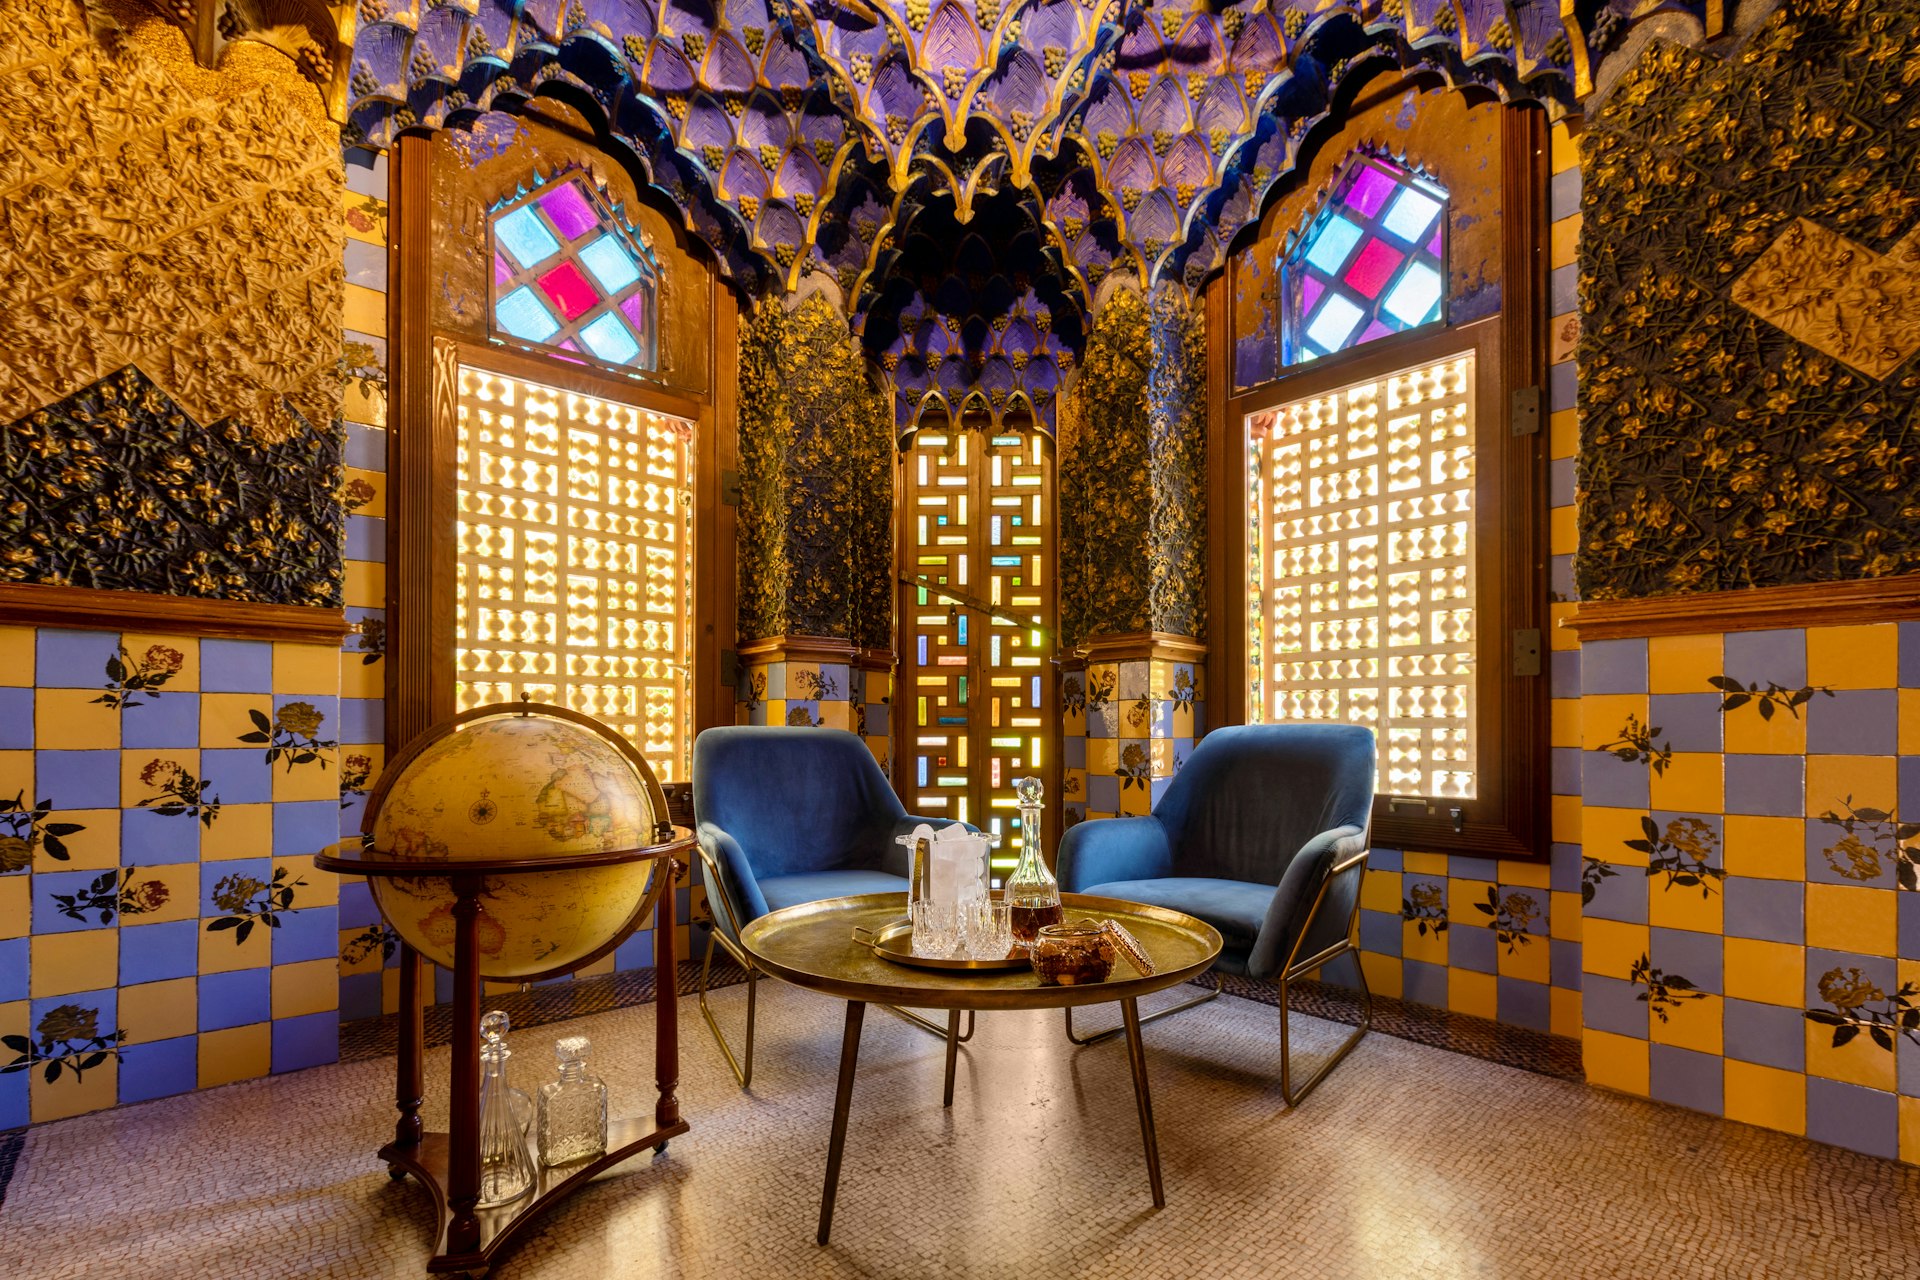 The smoking room of Casa Vicens